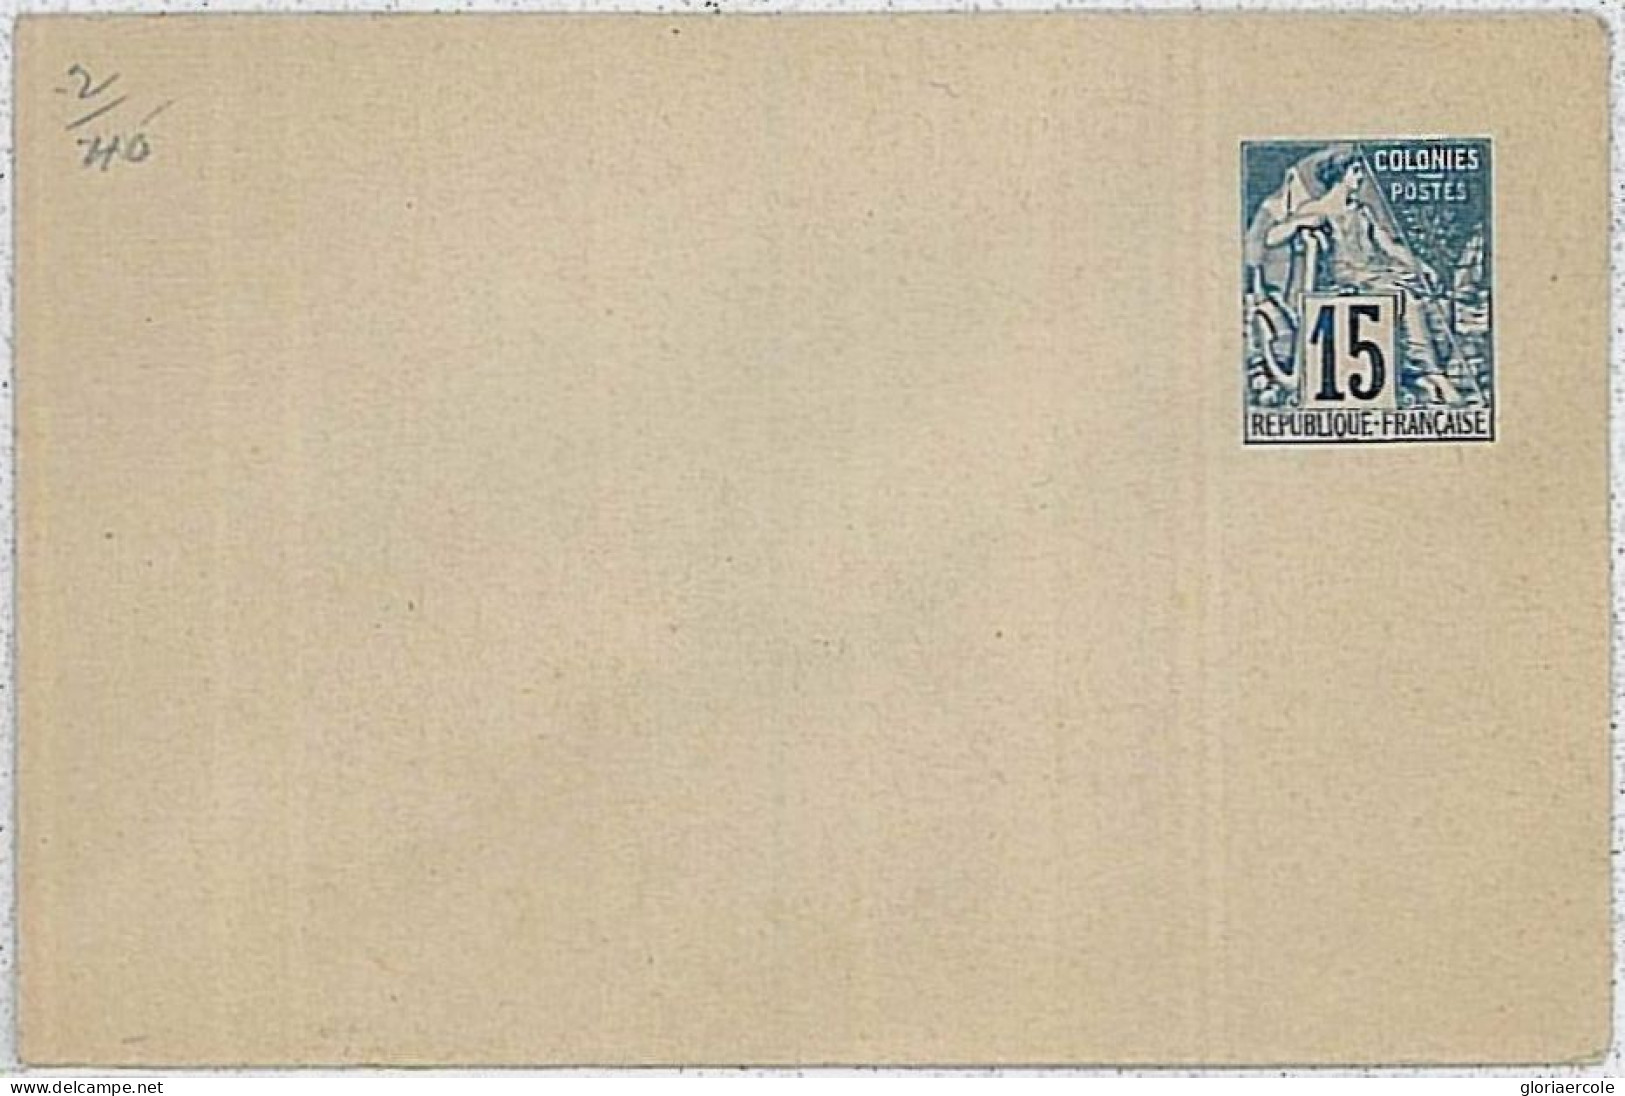 24181 -  COLONIES FRANCAISES  - POSTAL STATIONERY CARD - HIGGINGS & GAGE # 2 - Unclassified